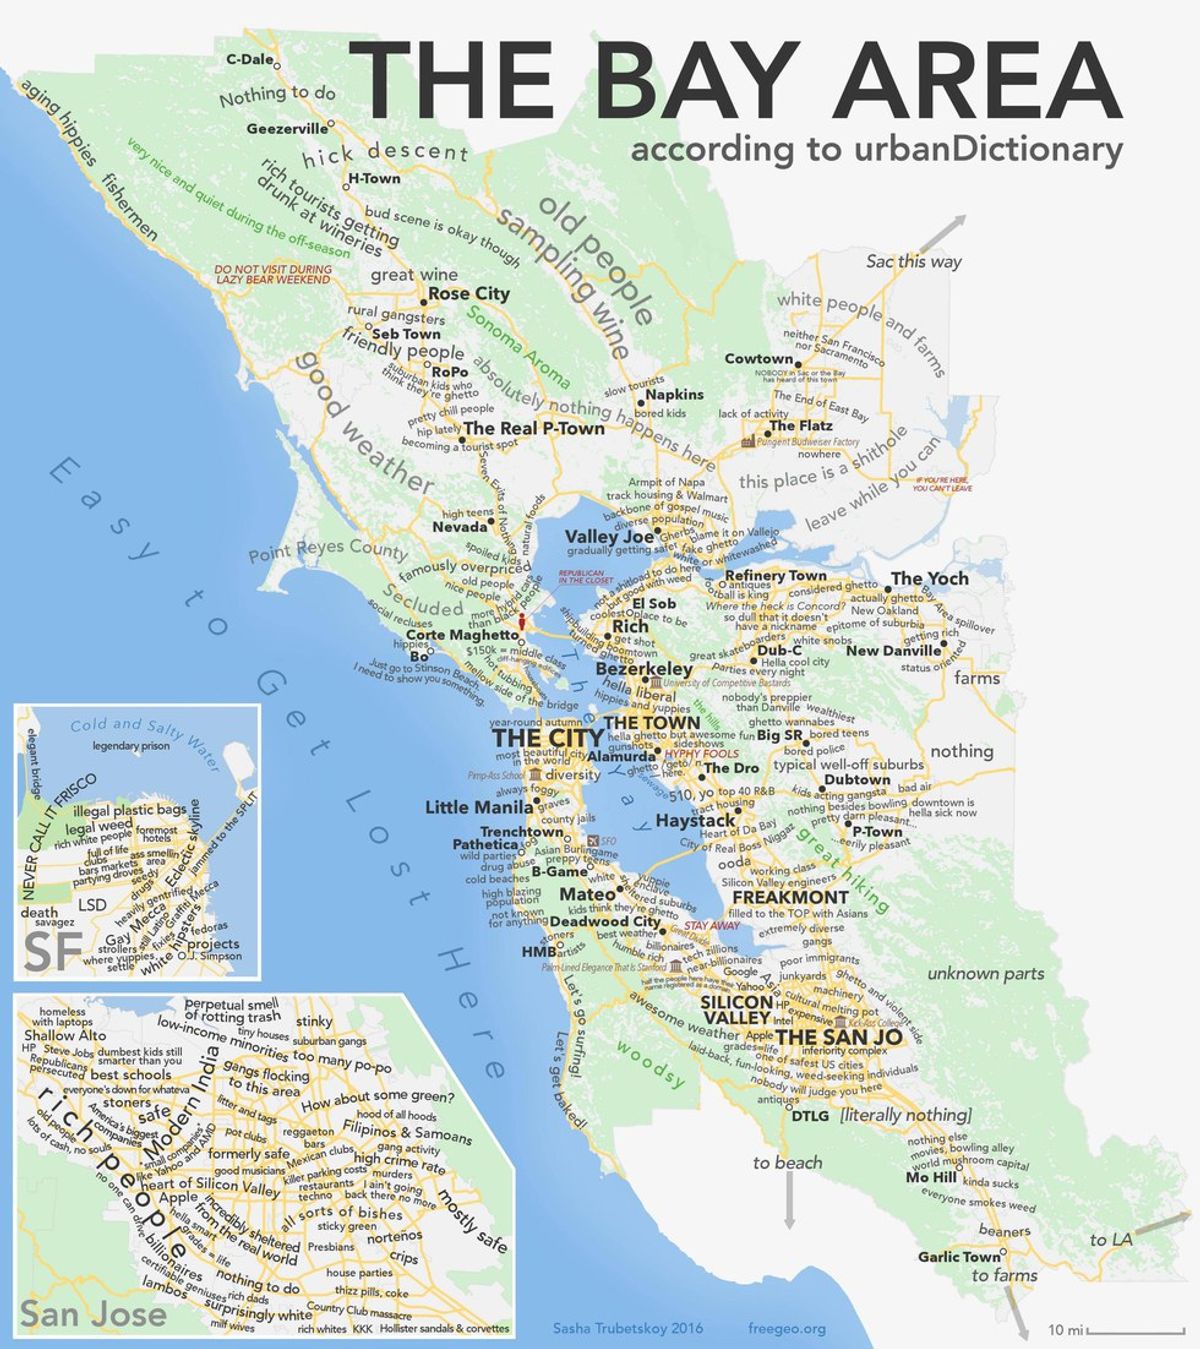 35 Signs You’re From The Bay Area